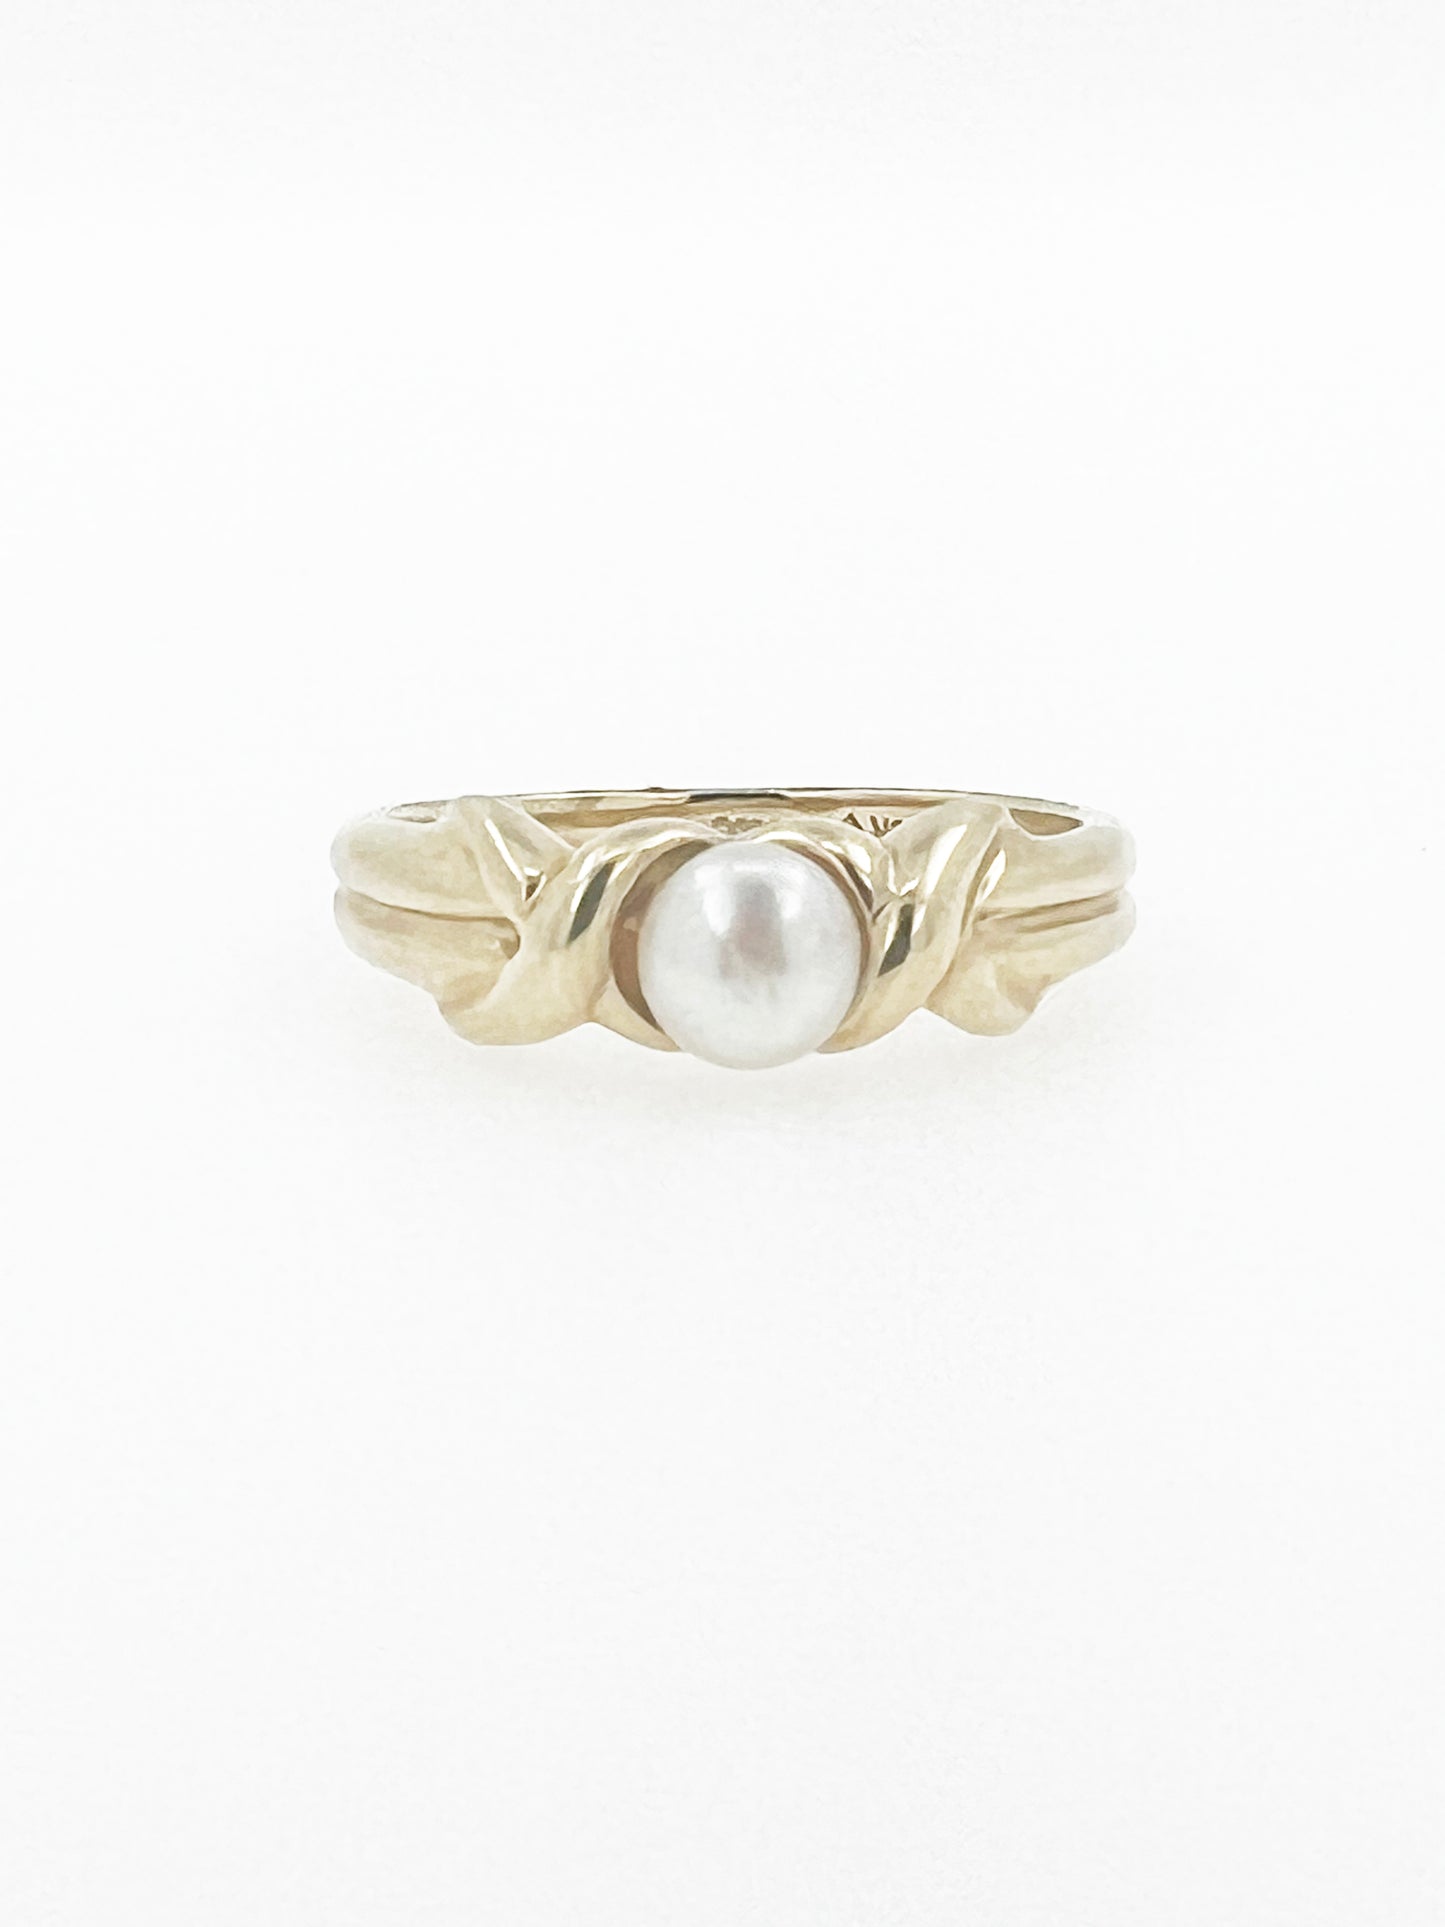 Individual Set Saltwater Pearl Ring in 10k By Maxwell The Jeweler